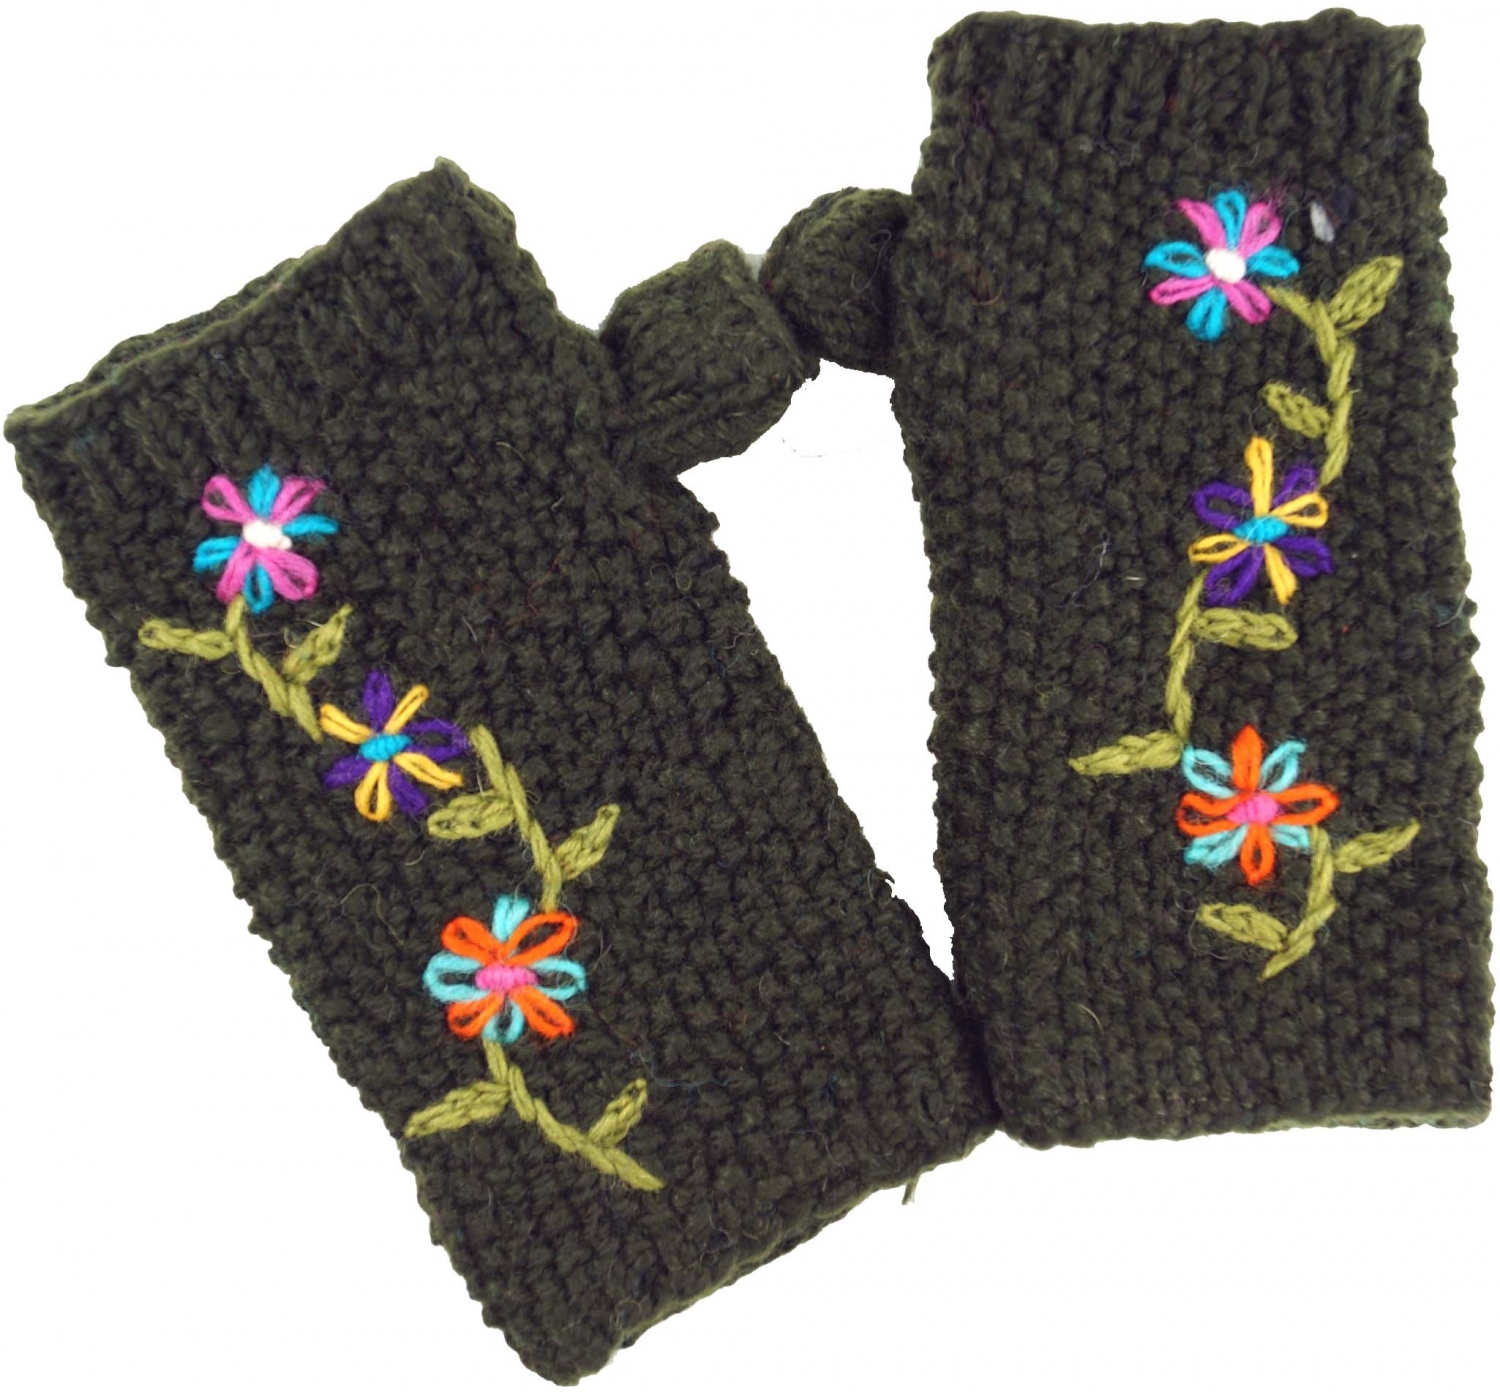 knitted gauntlets